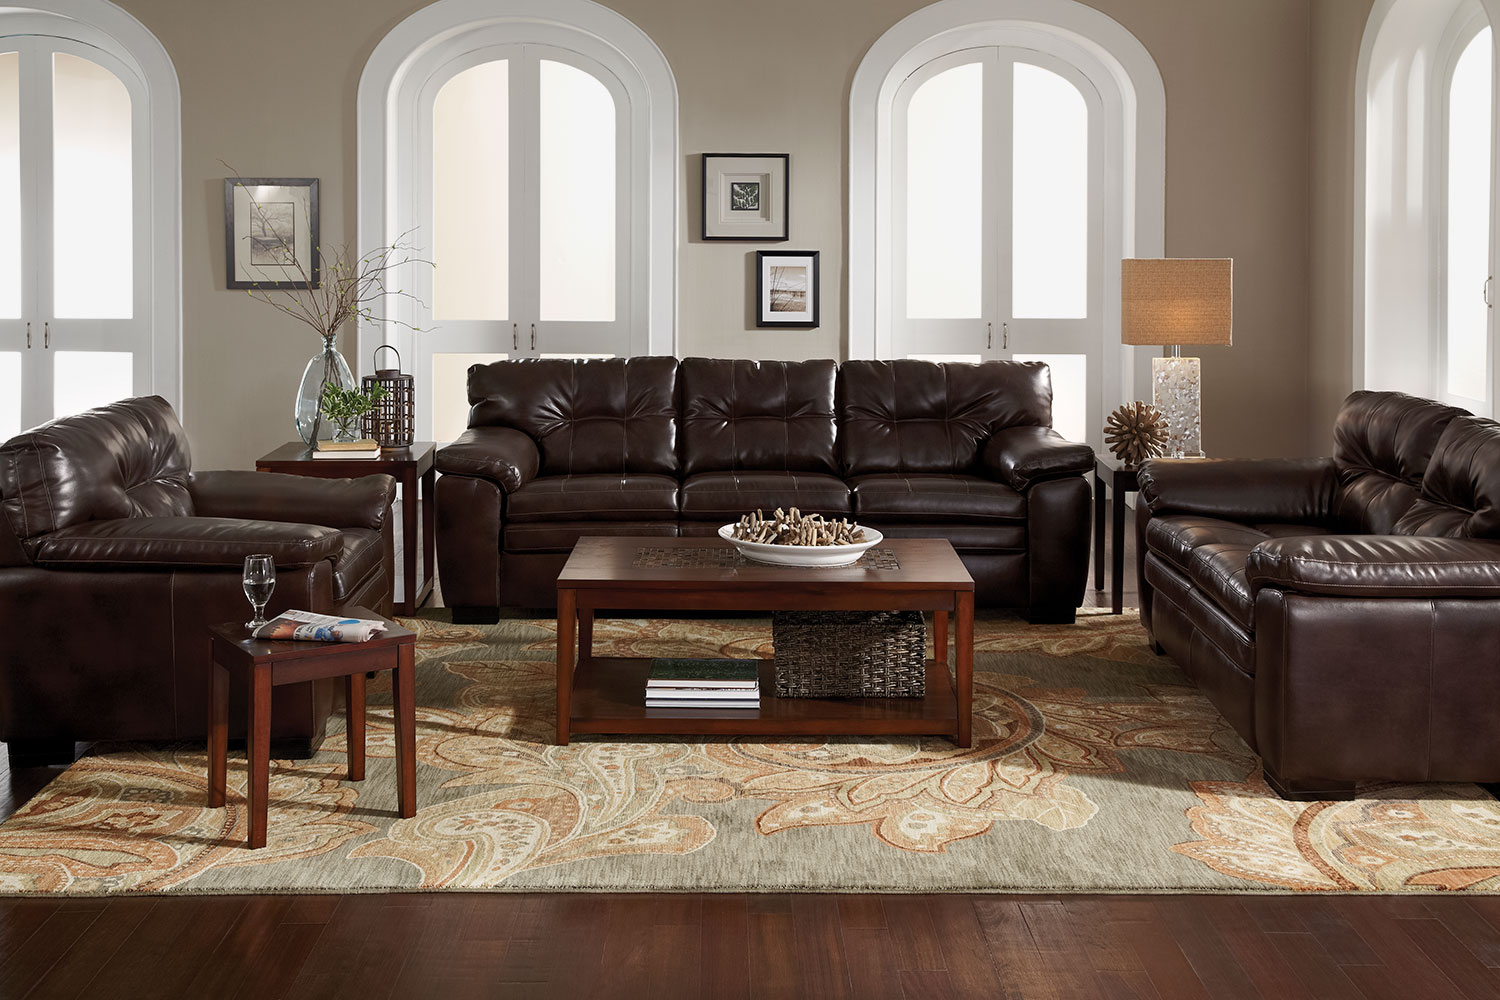 Magnum Sofa and Chair Set - Brown | Value City Furniture